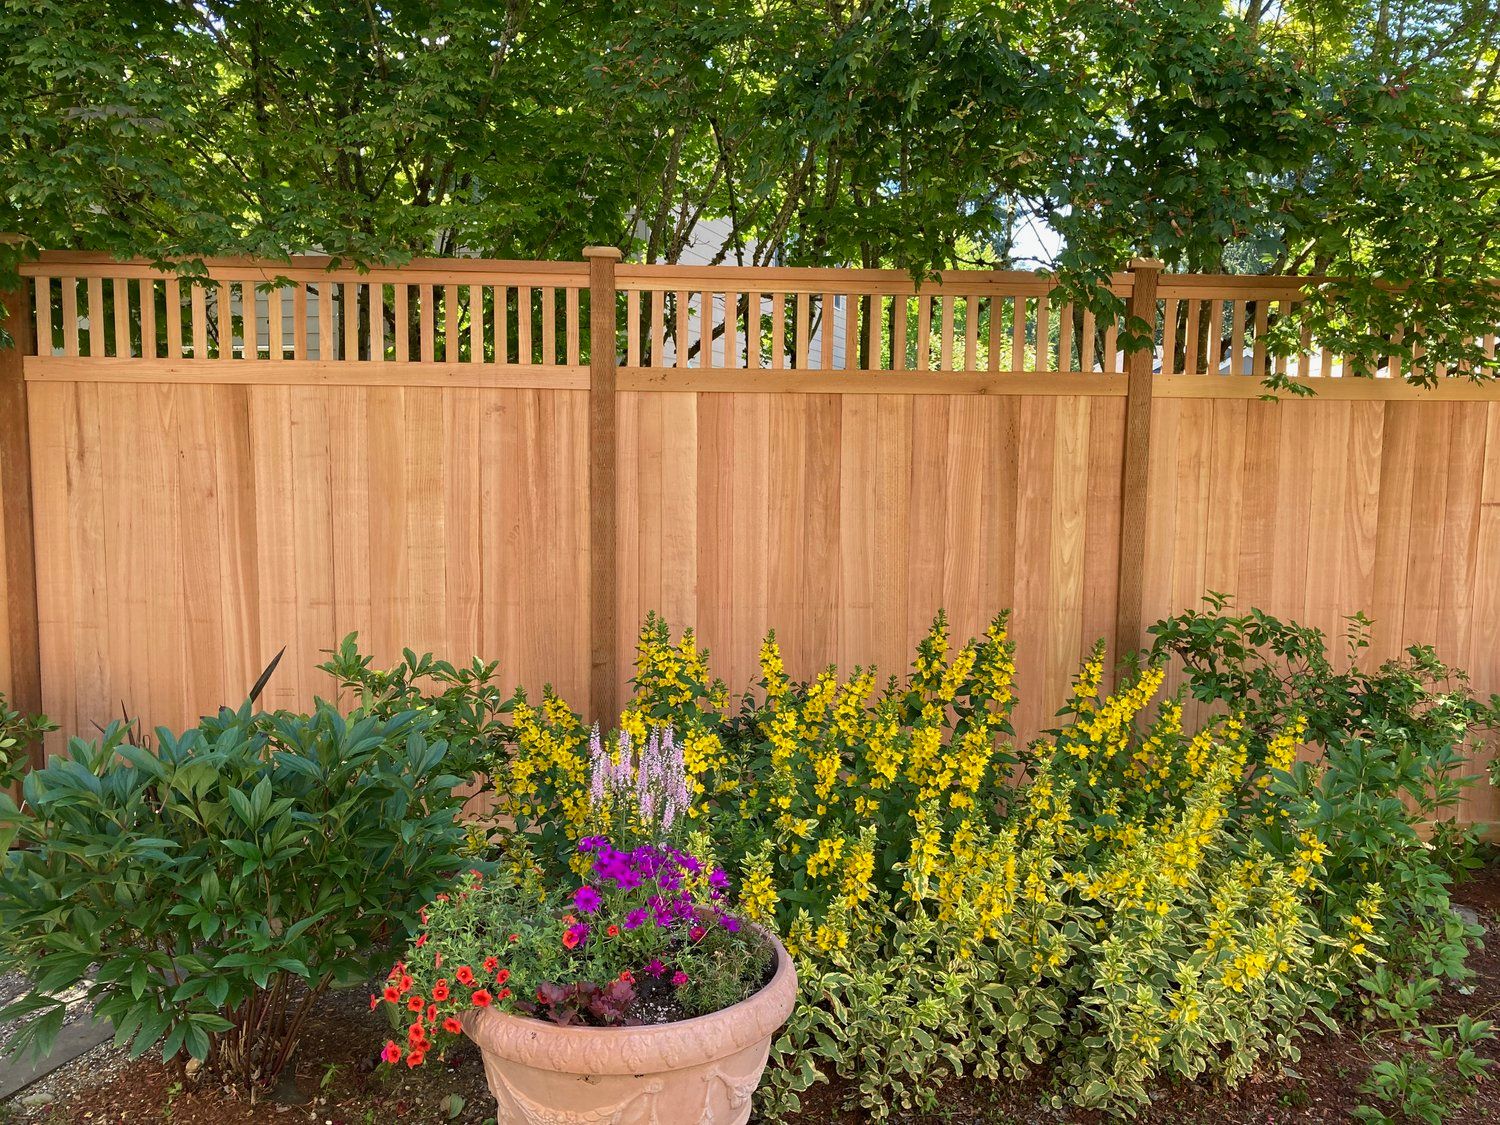 City of Snohomish residential wood fence with window-top design